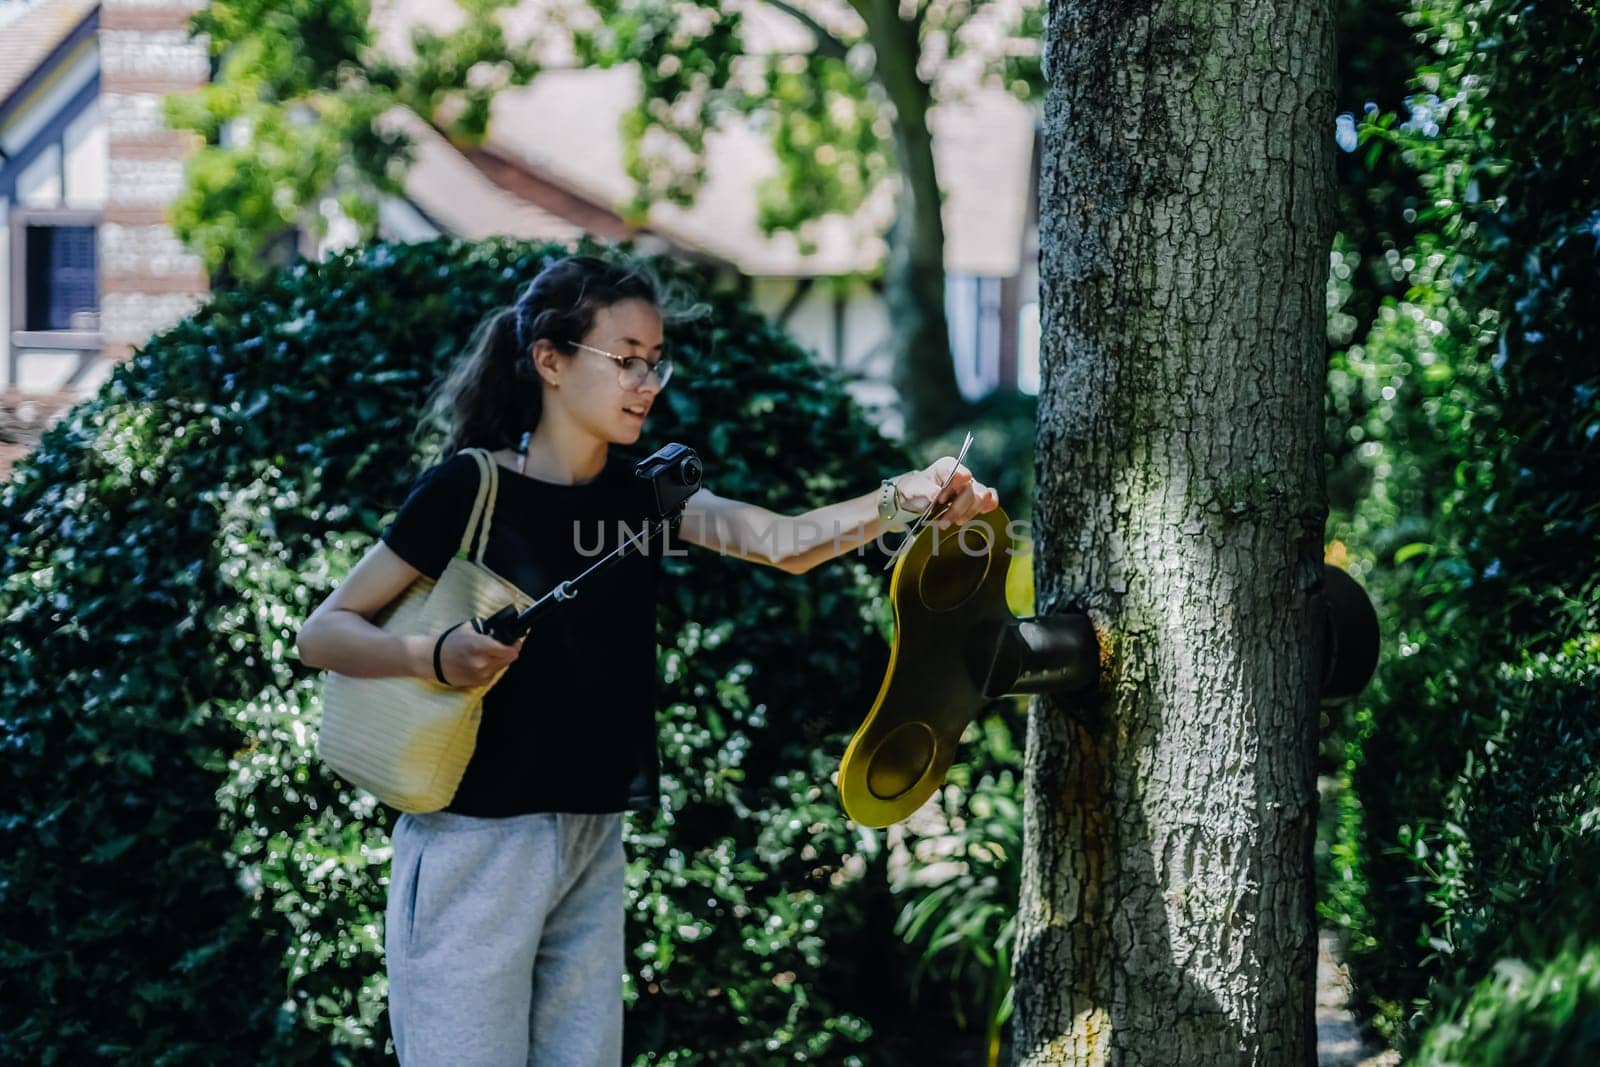 Portrait of one beautiful Caucasian brunette teenage girl with a mini camera on a stick turns a large golden key sticking out of a tree trunk on a sunny summer day, close-up side view.